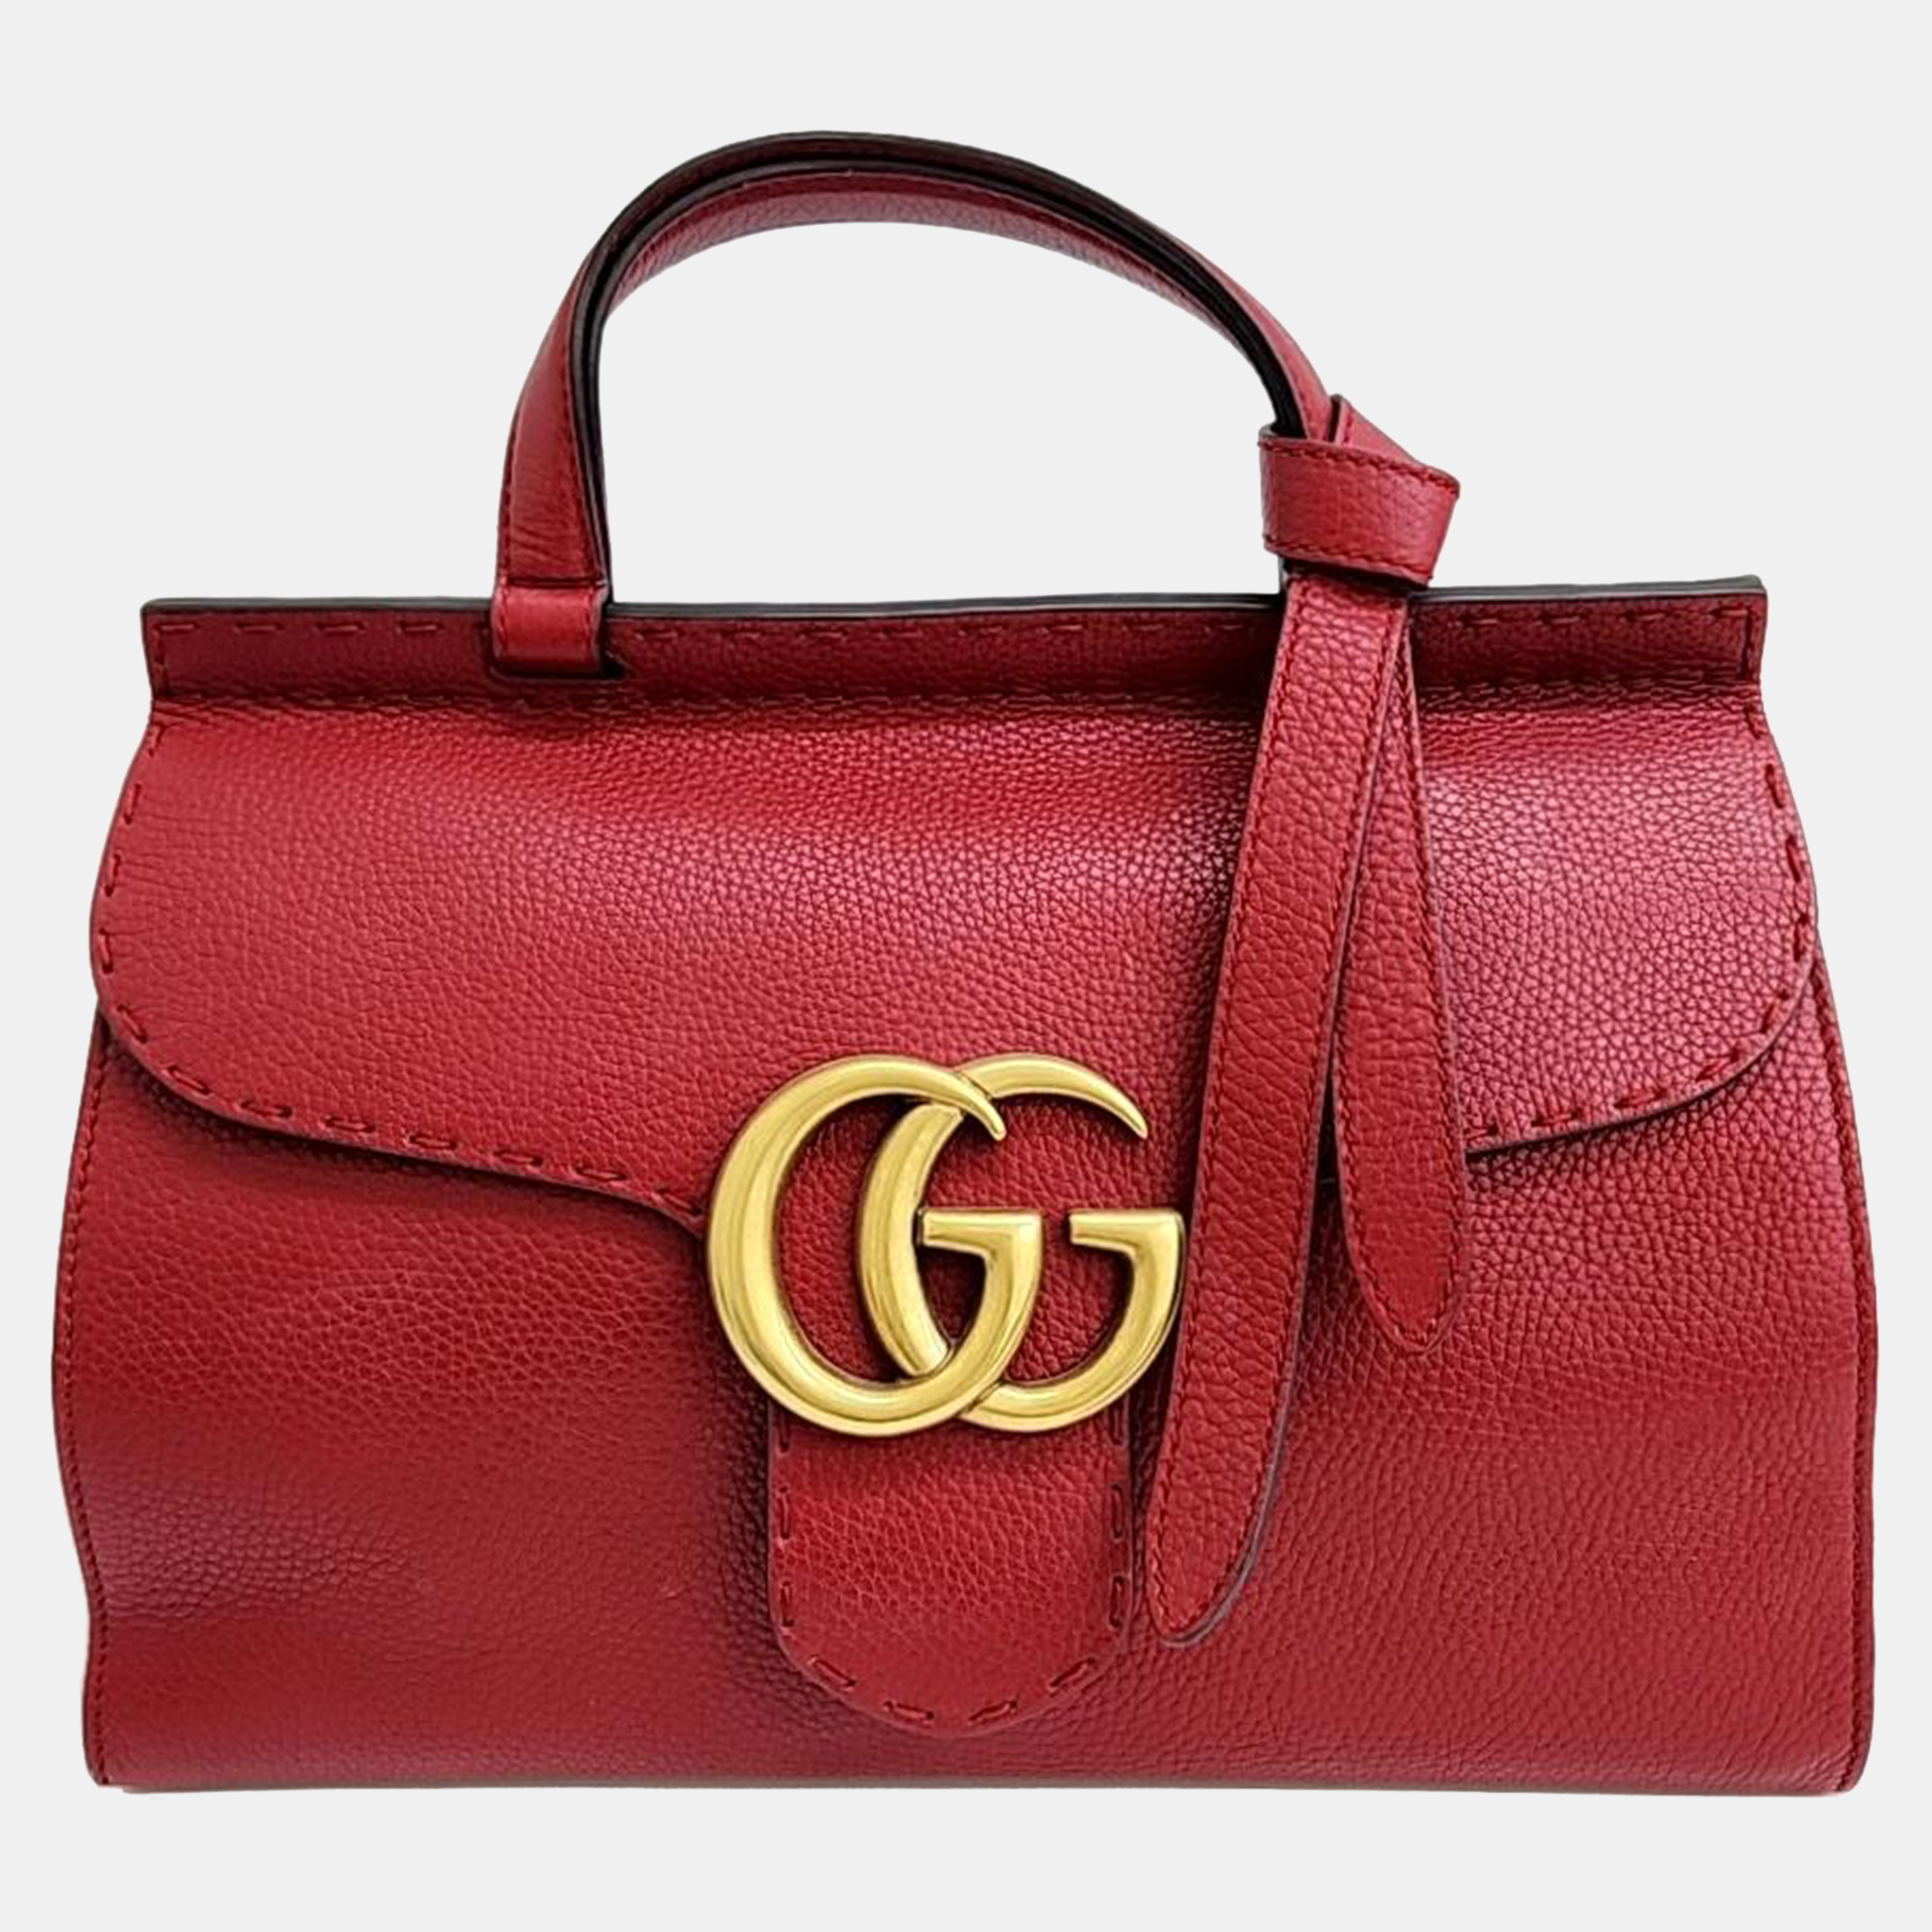 

Gucci GG Marmont Tote Bag, Red